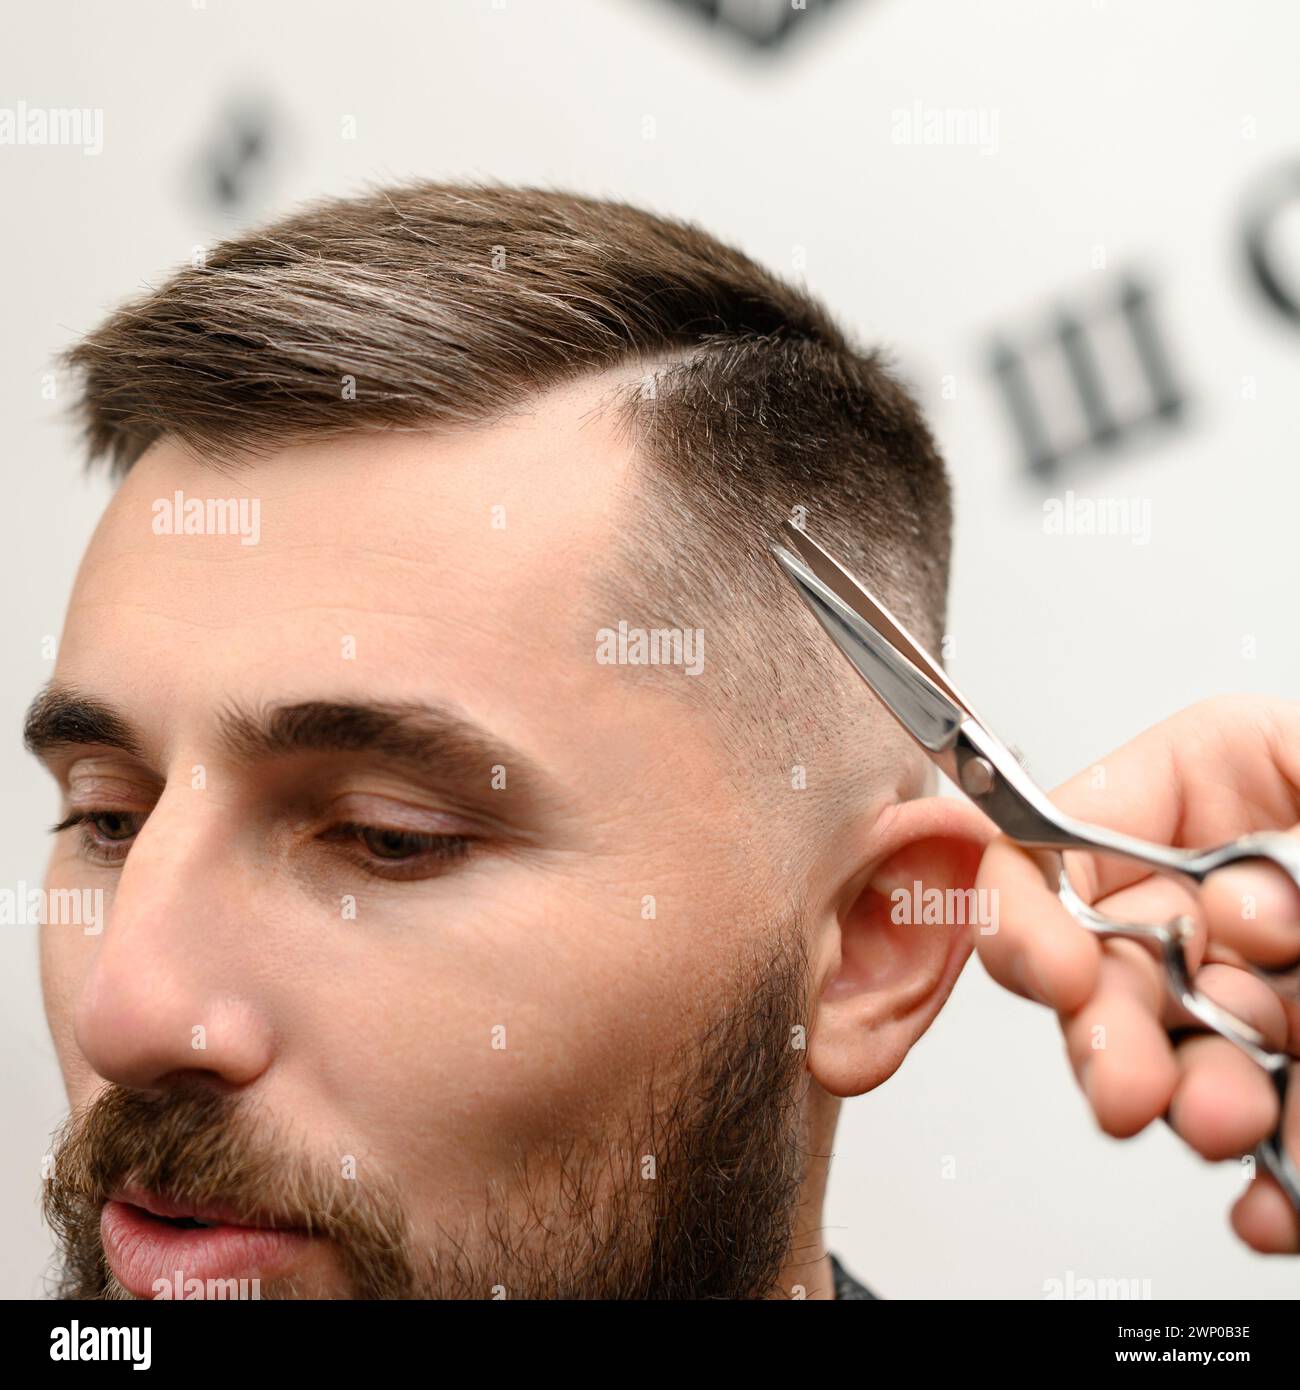 Haircut and alignment of the contour of the head with scissors. Short haircut in the barbershop. Stock Photo